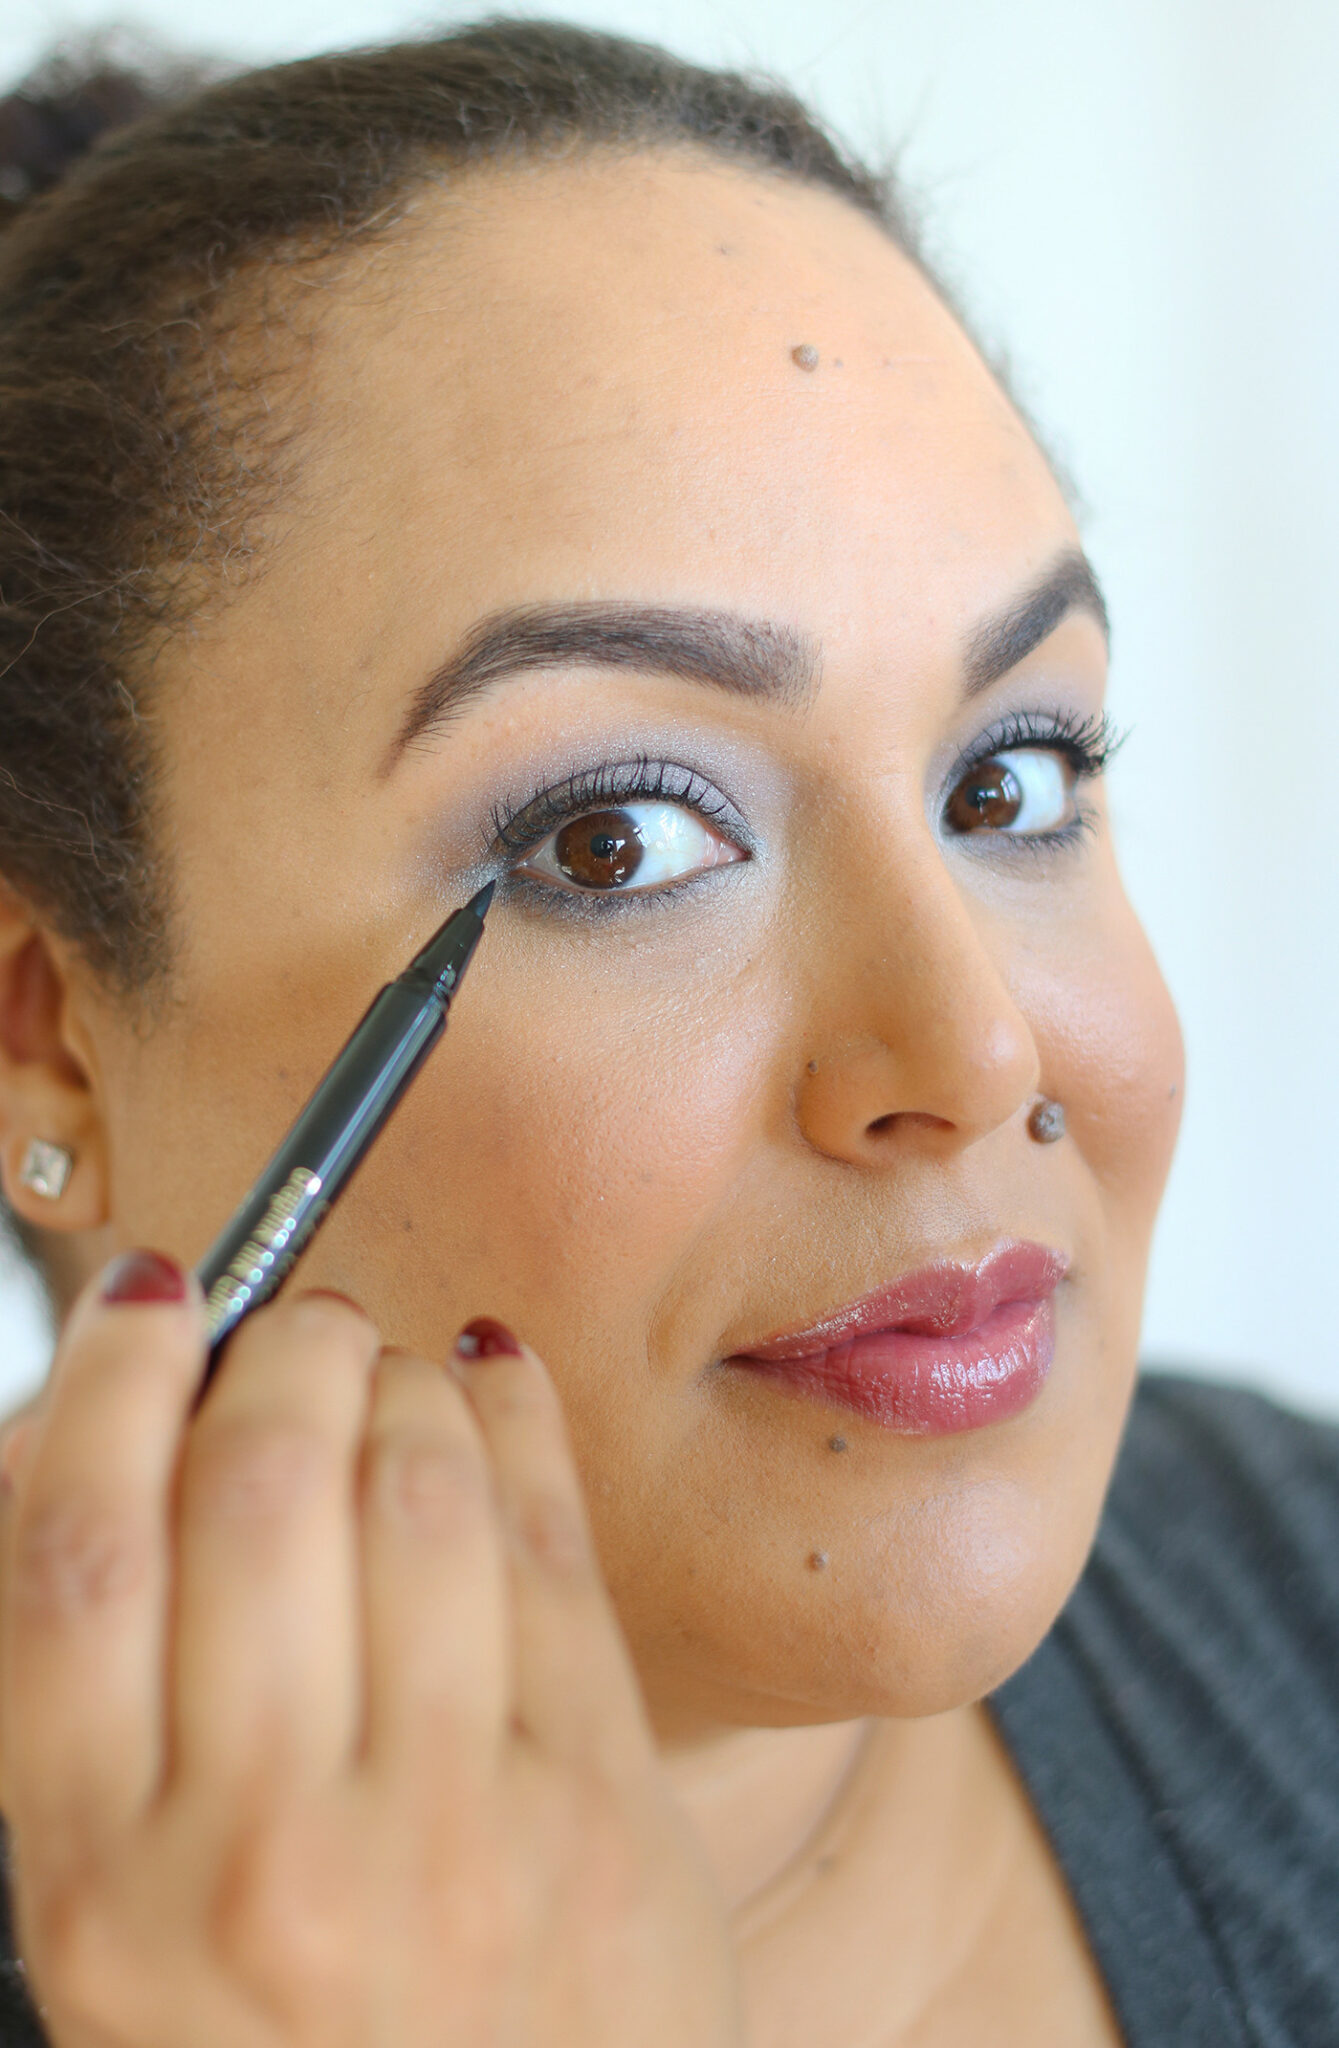 Tis the season to break out the sparkle and get glam. See how I am getting holiday ready in under 15 minutes with this easy holiday makeup tutorial!